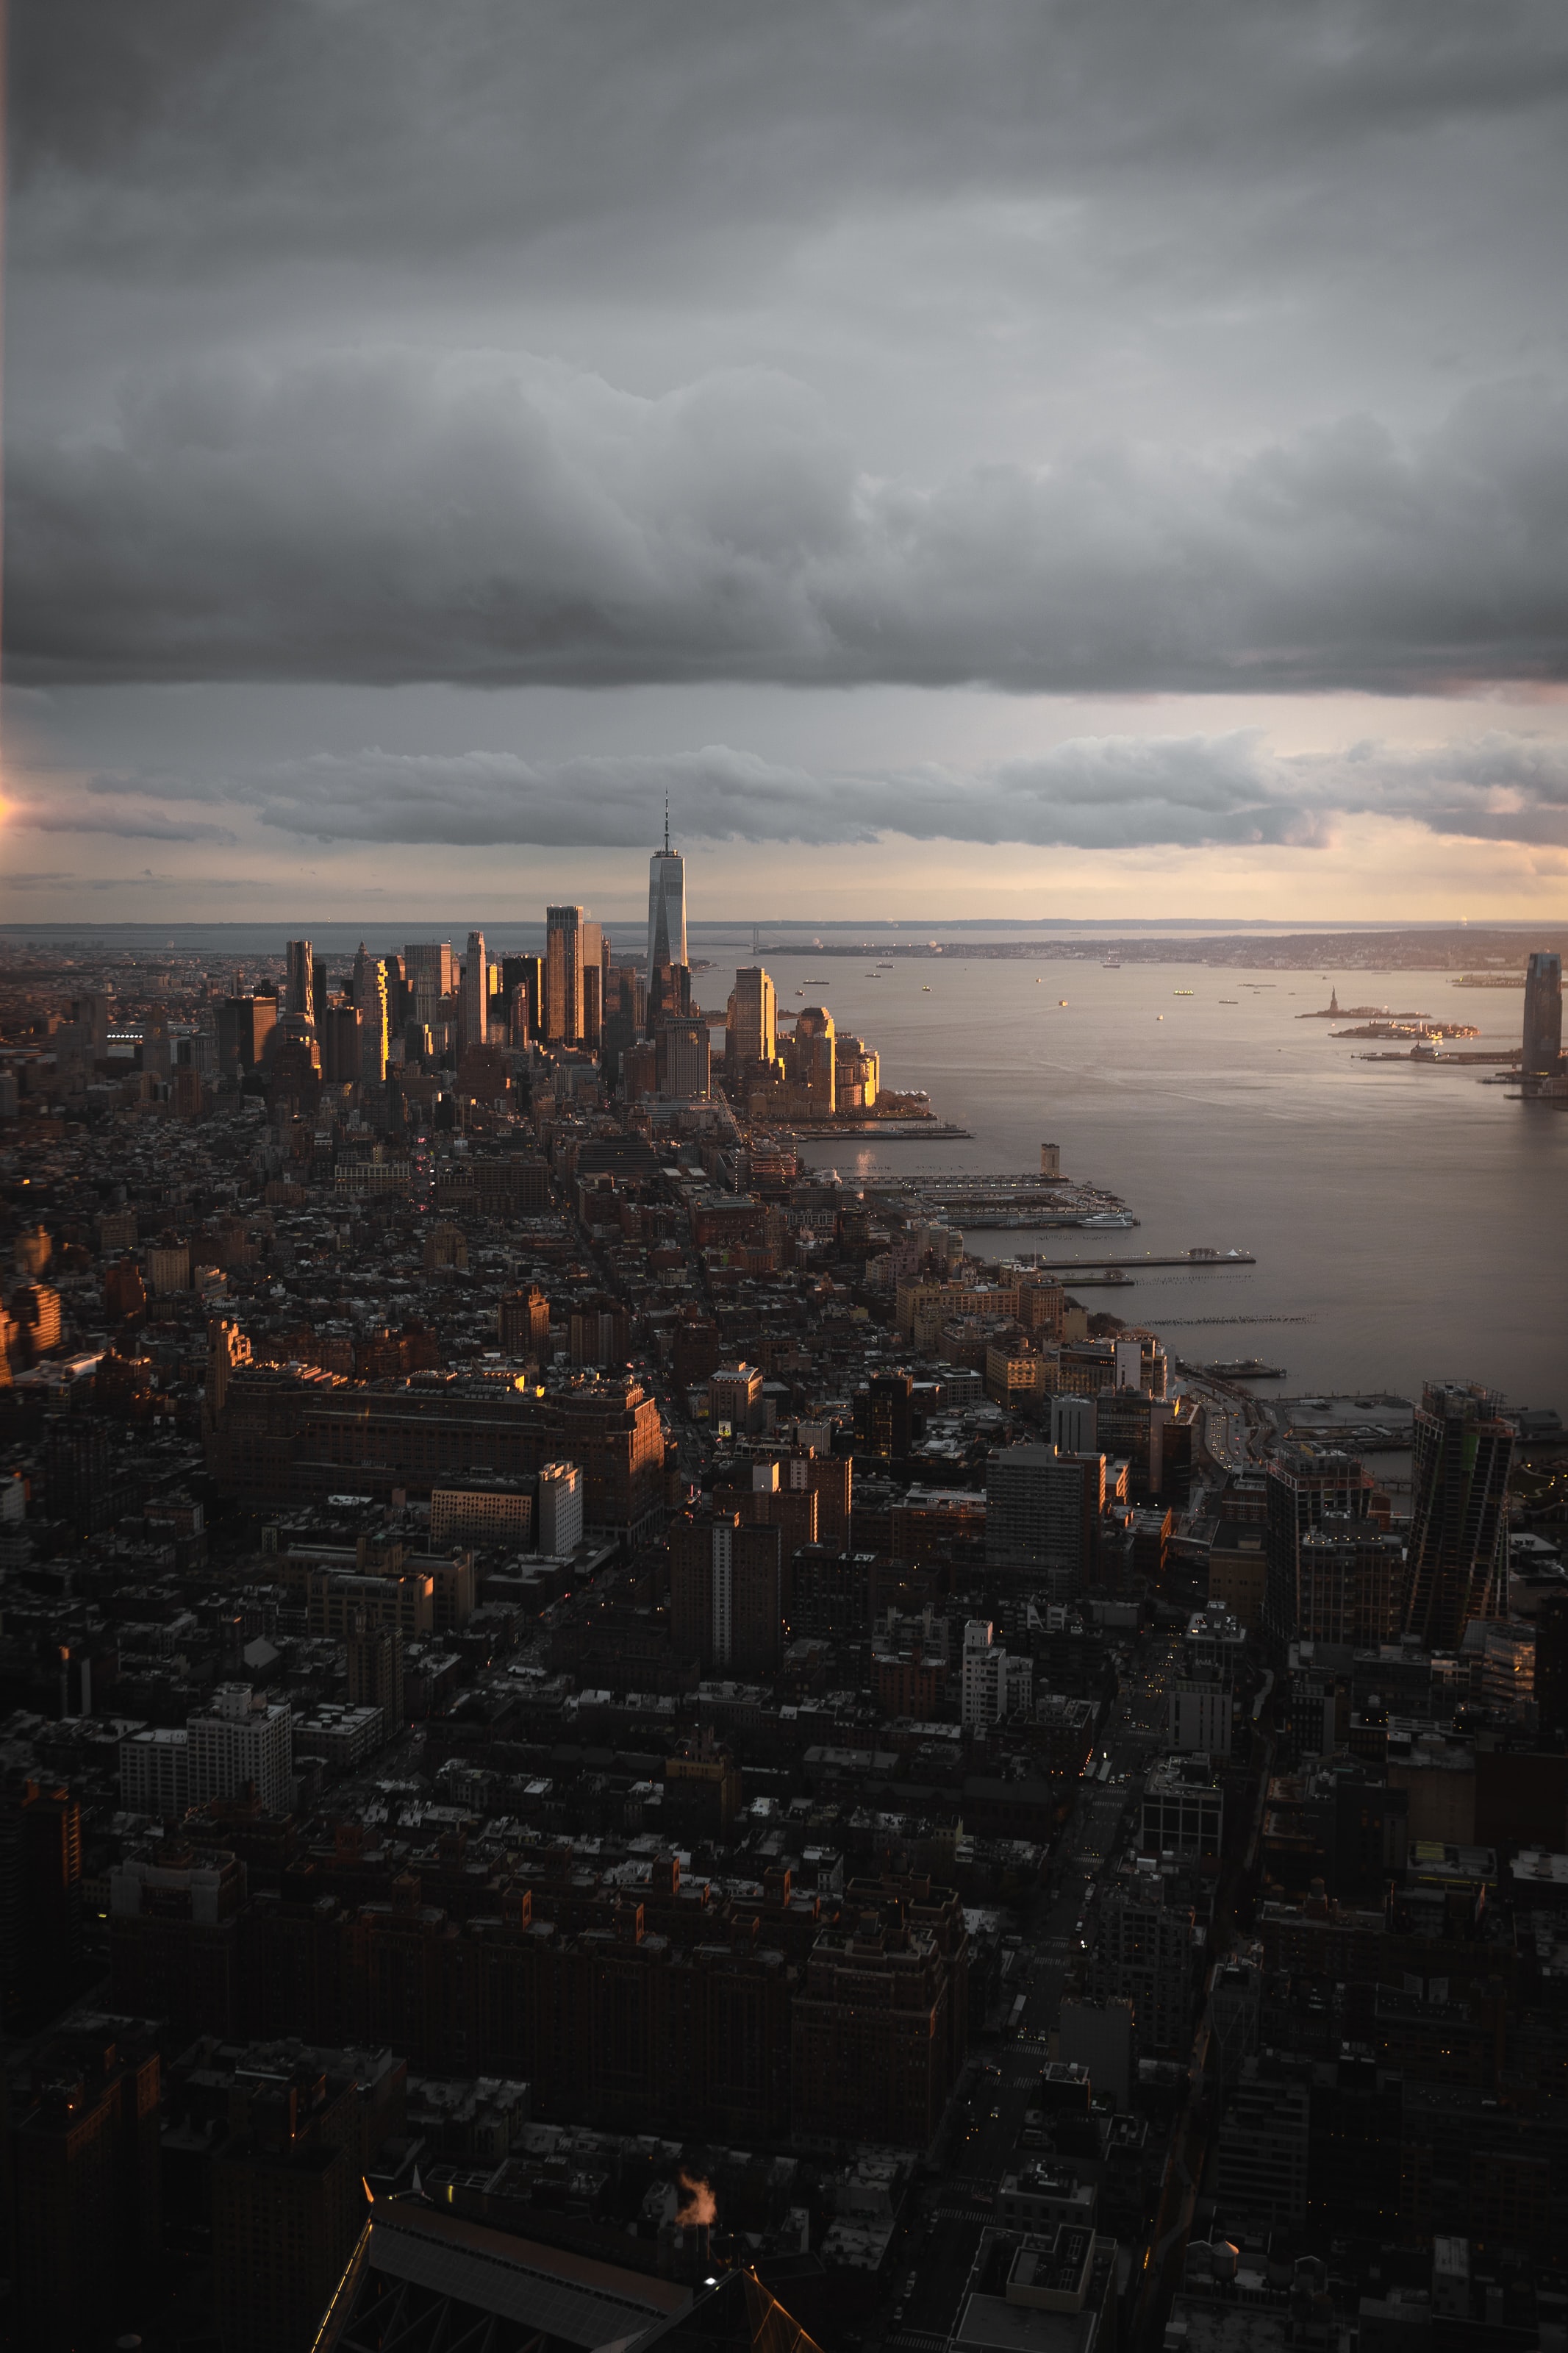 view from above, building, sunset, dusk, twilight, coast, cities, city iphone wallpaper